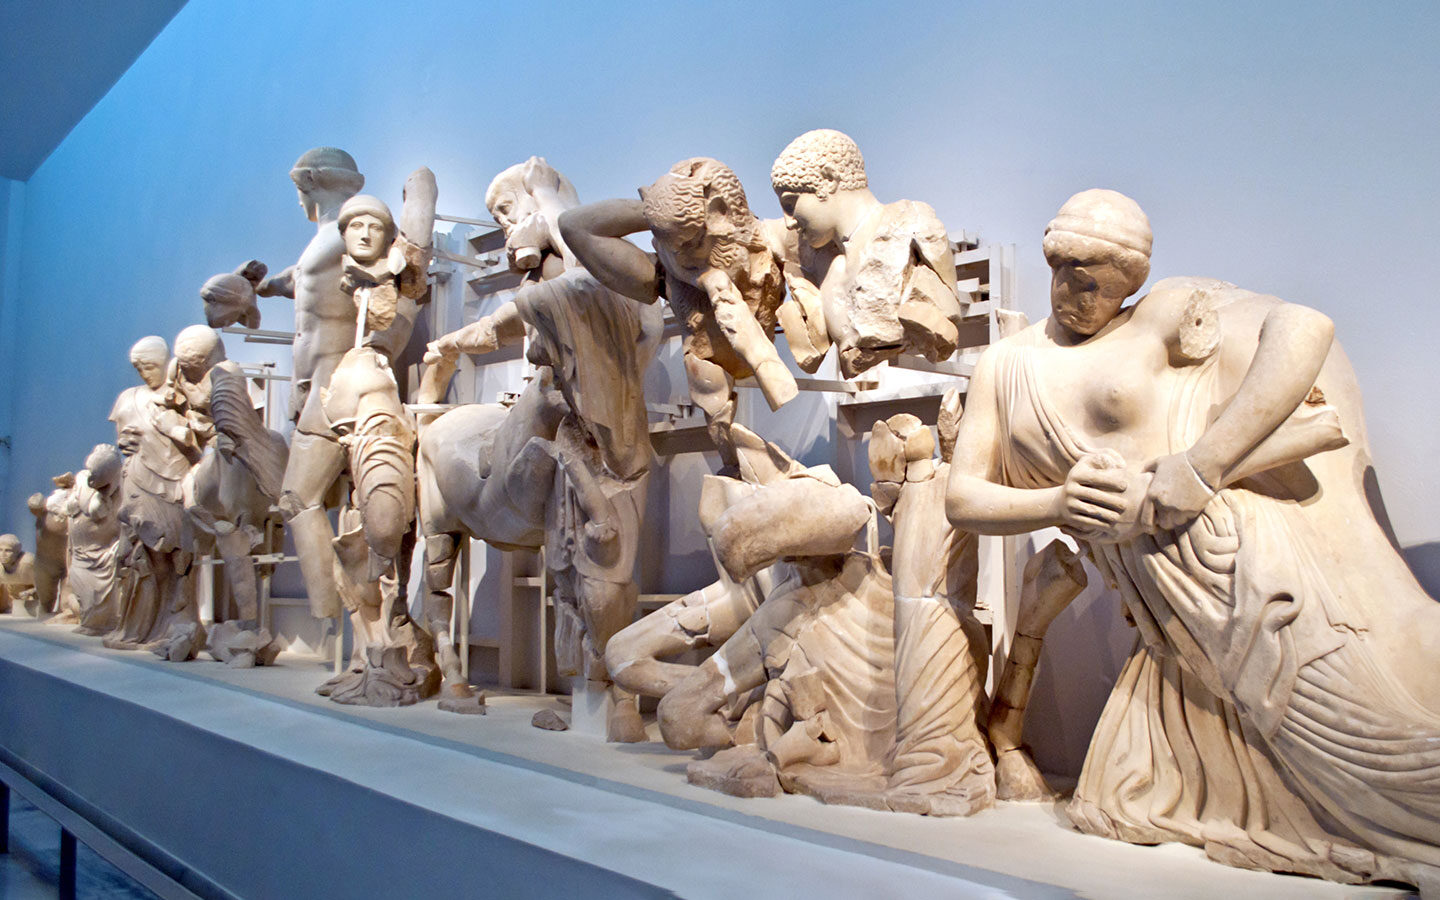 Statues in the Archaeological Museum at Olympia, Greece